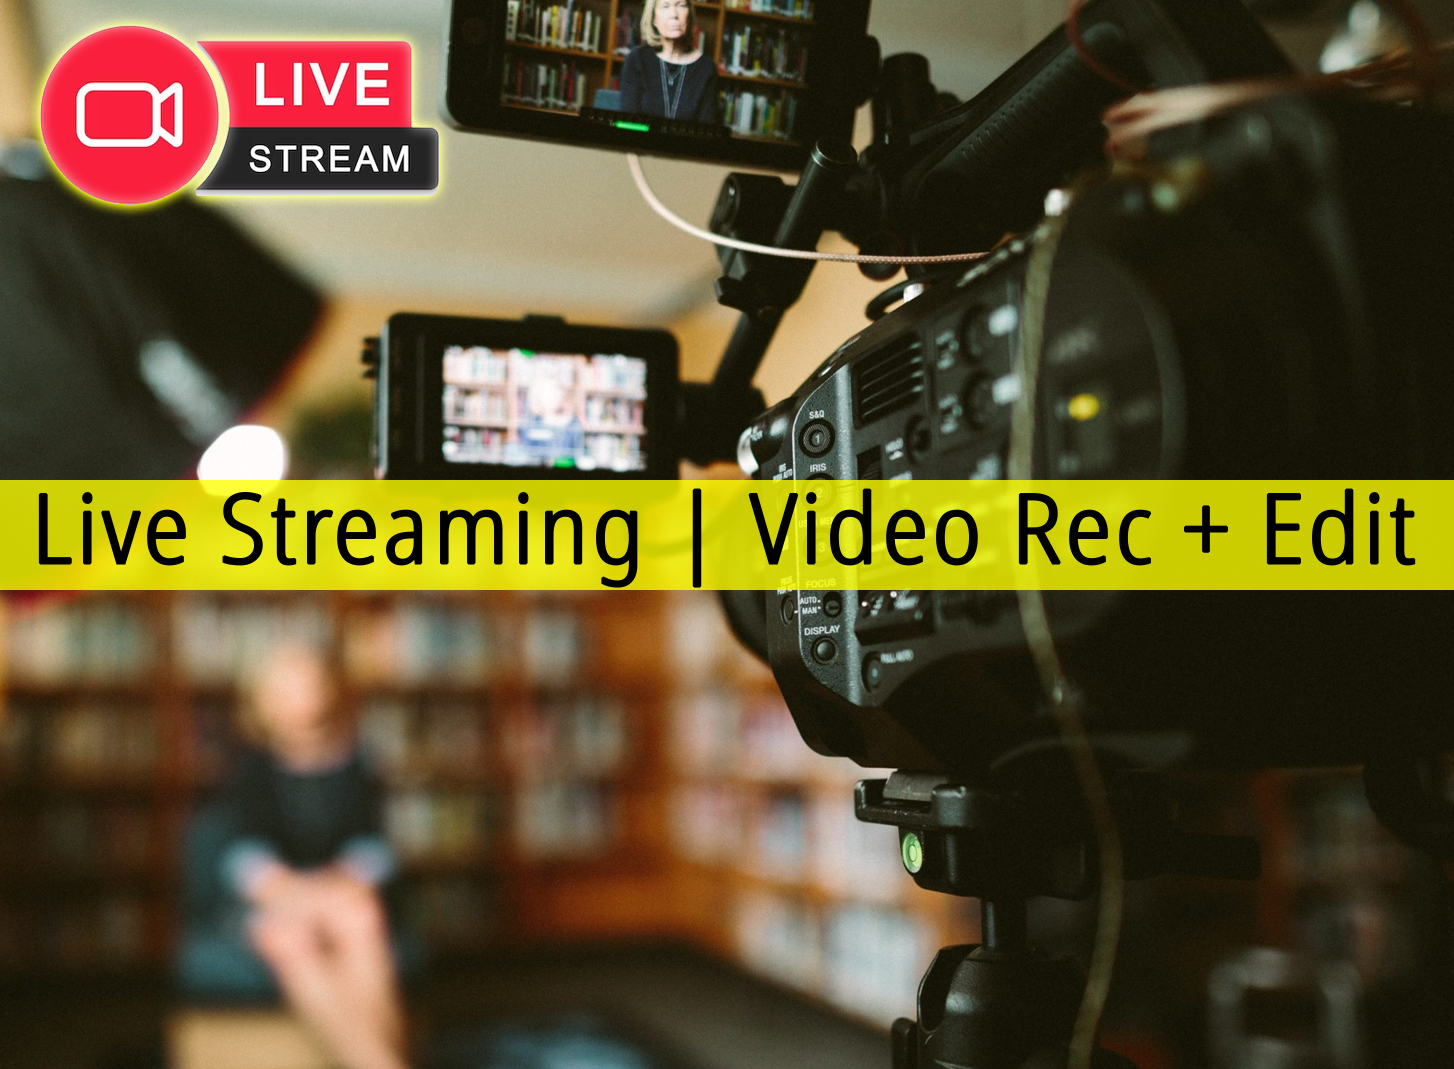 Live Streaming | Video Recording & Editing